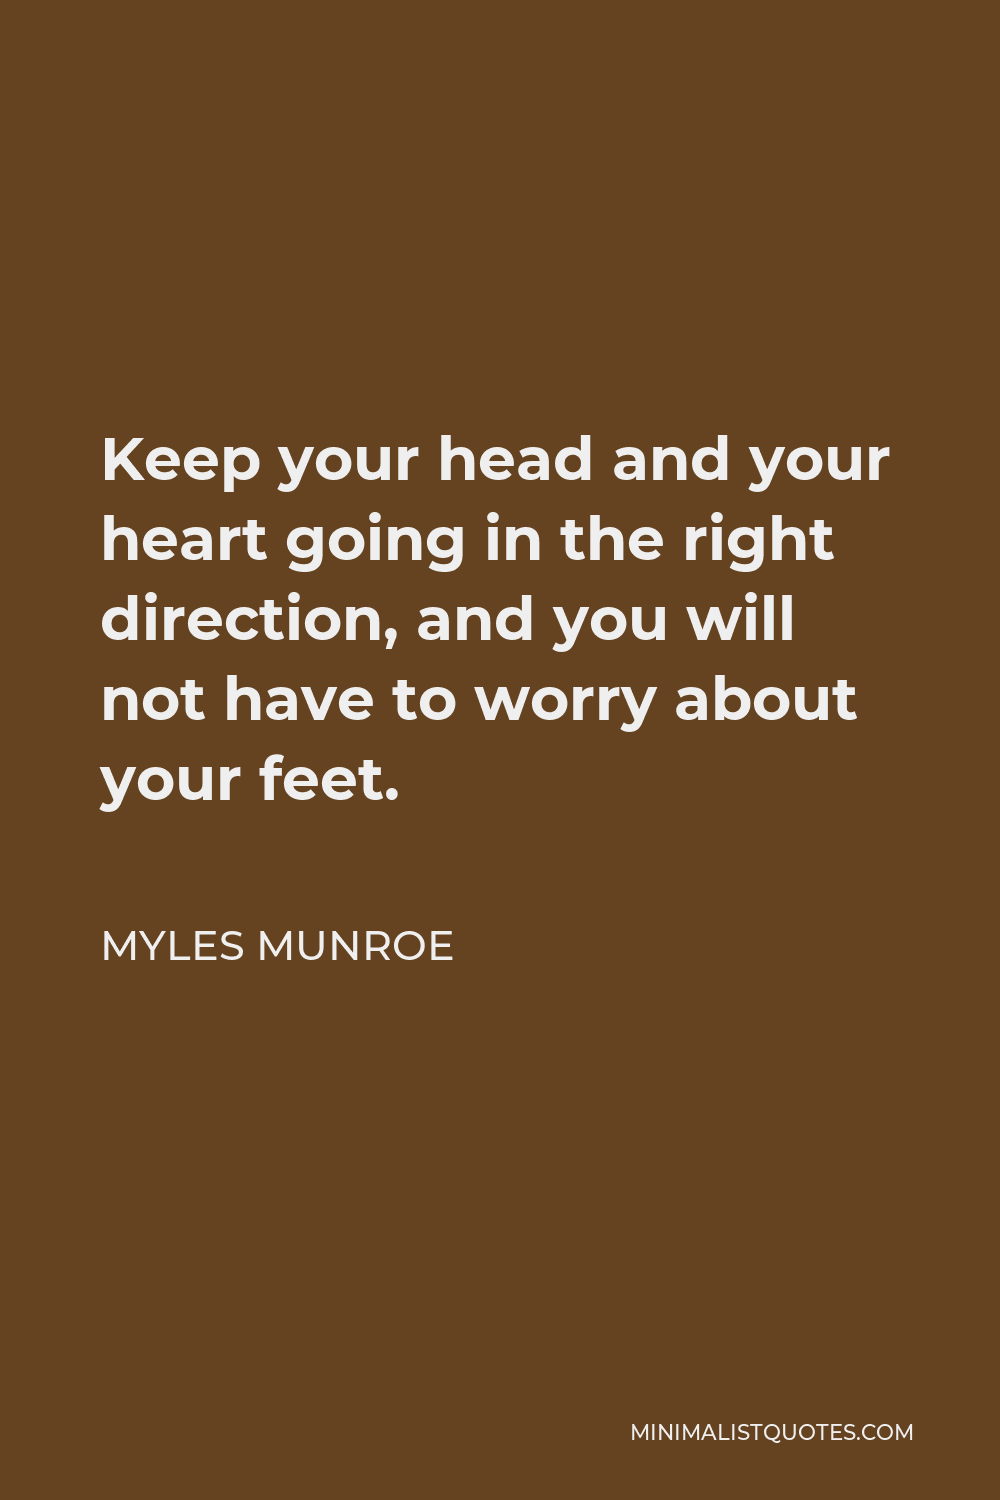 Myles Munroe Quote - Keep your head and your heart going in the right direction, and you will not have to worry about your feet.